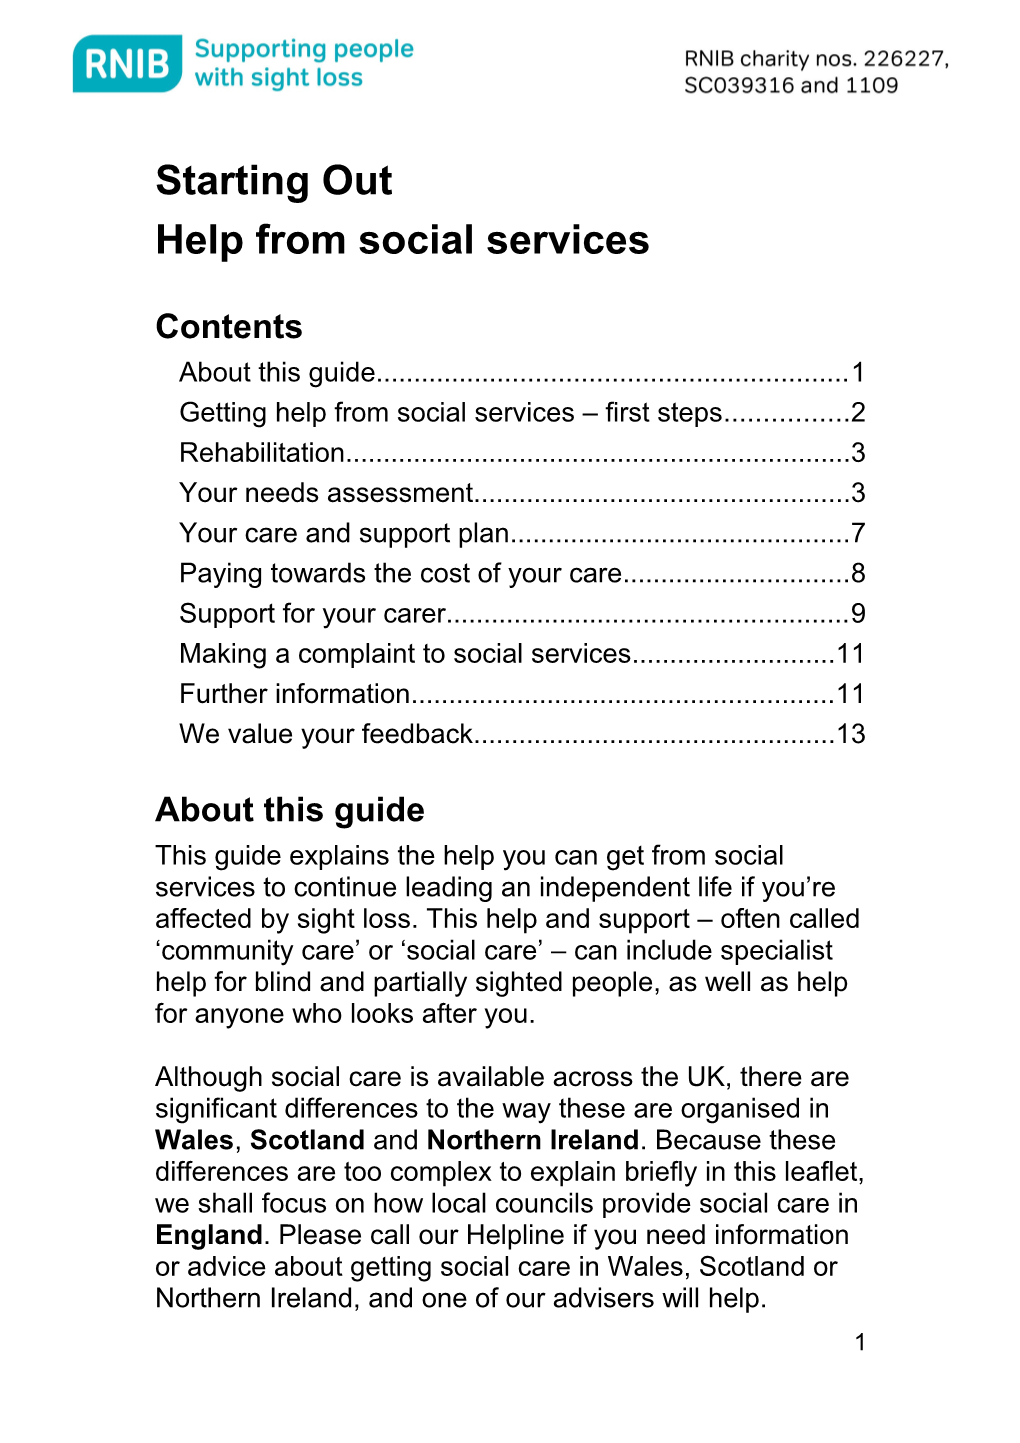 Help from Social Services